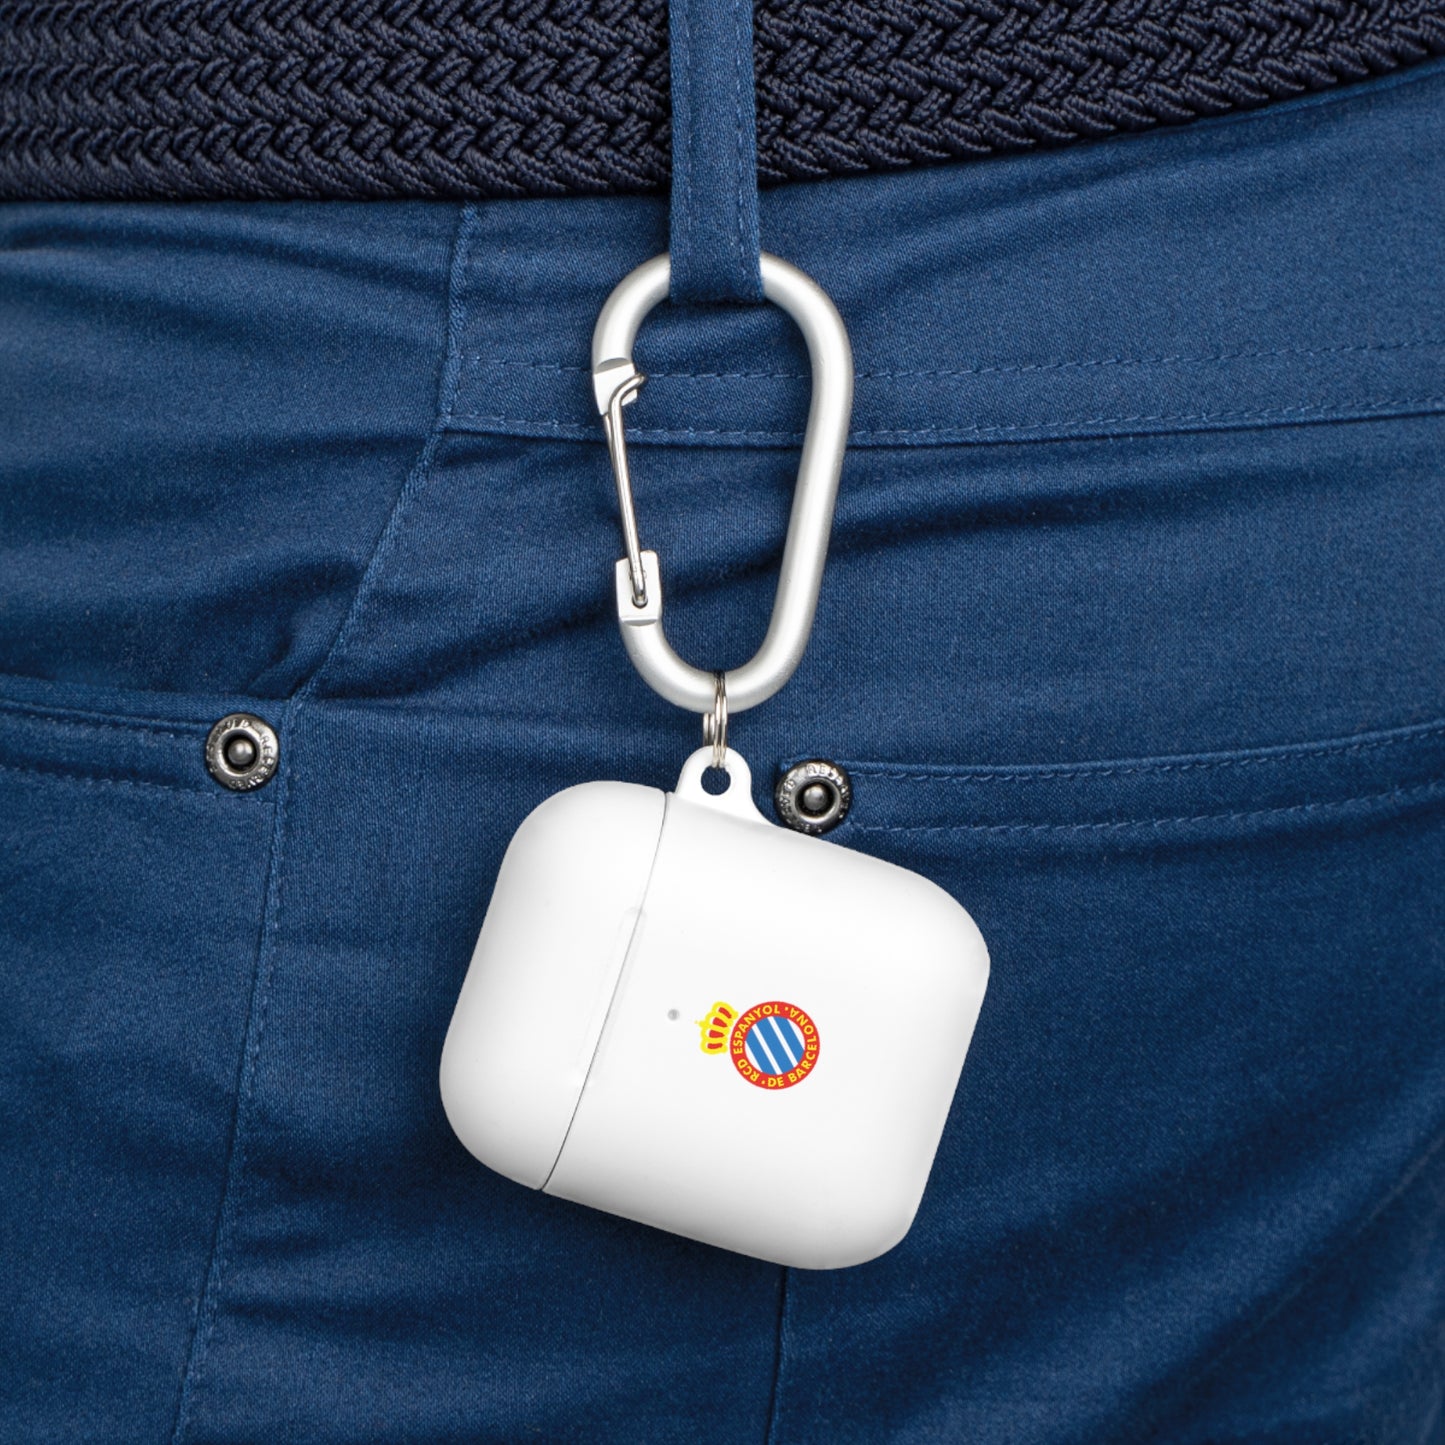 RCD Espanyol De Barcelona AirPods and AirPods Pro Case Cover